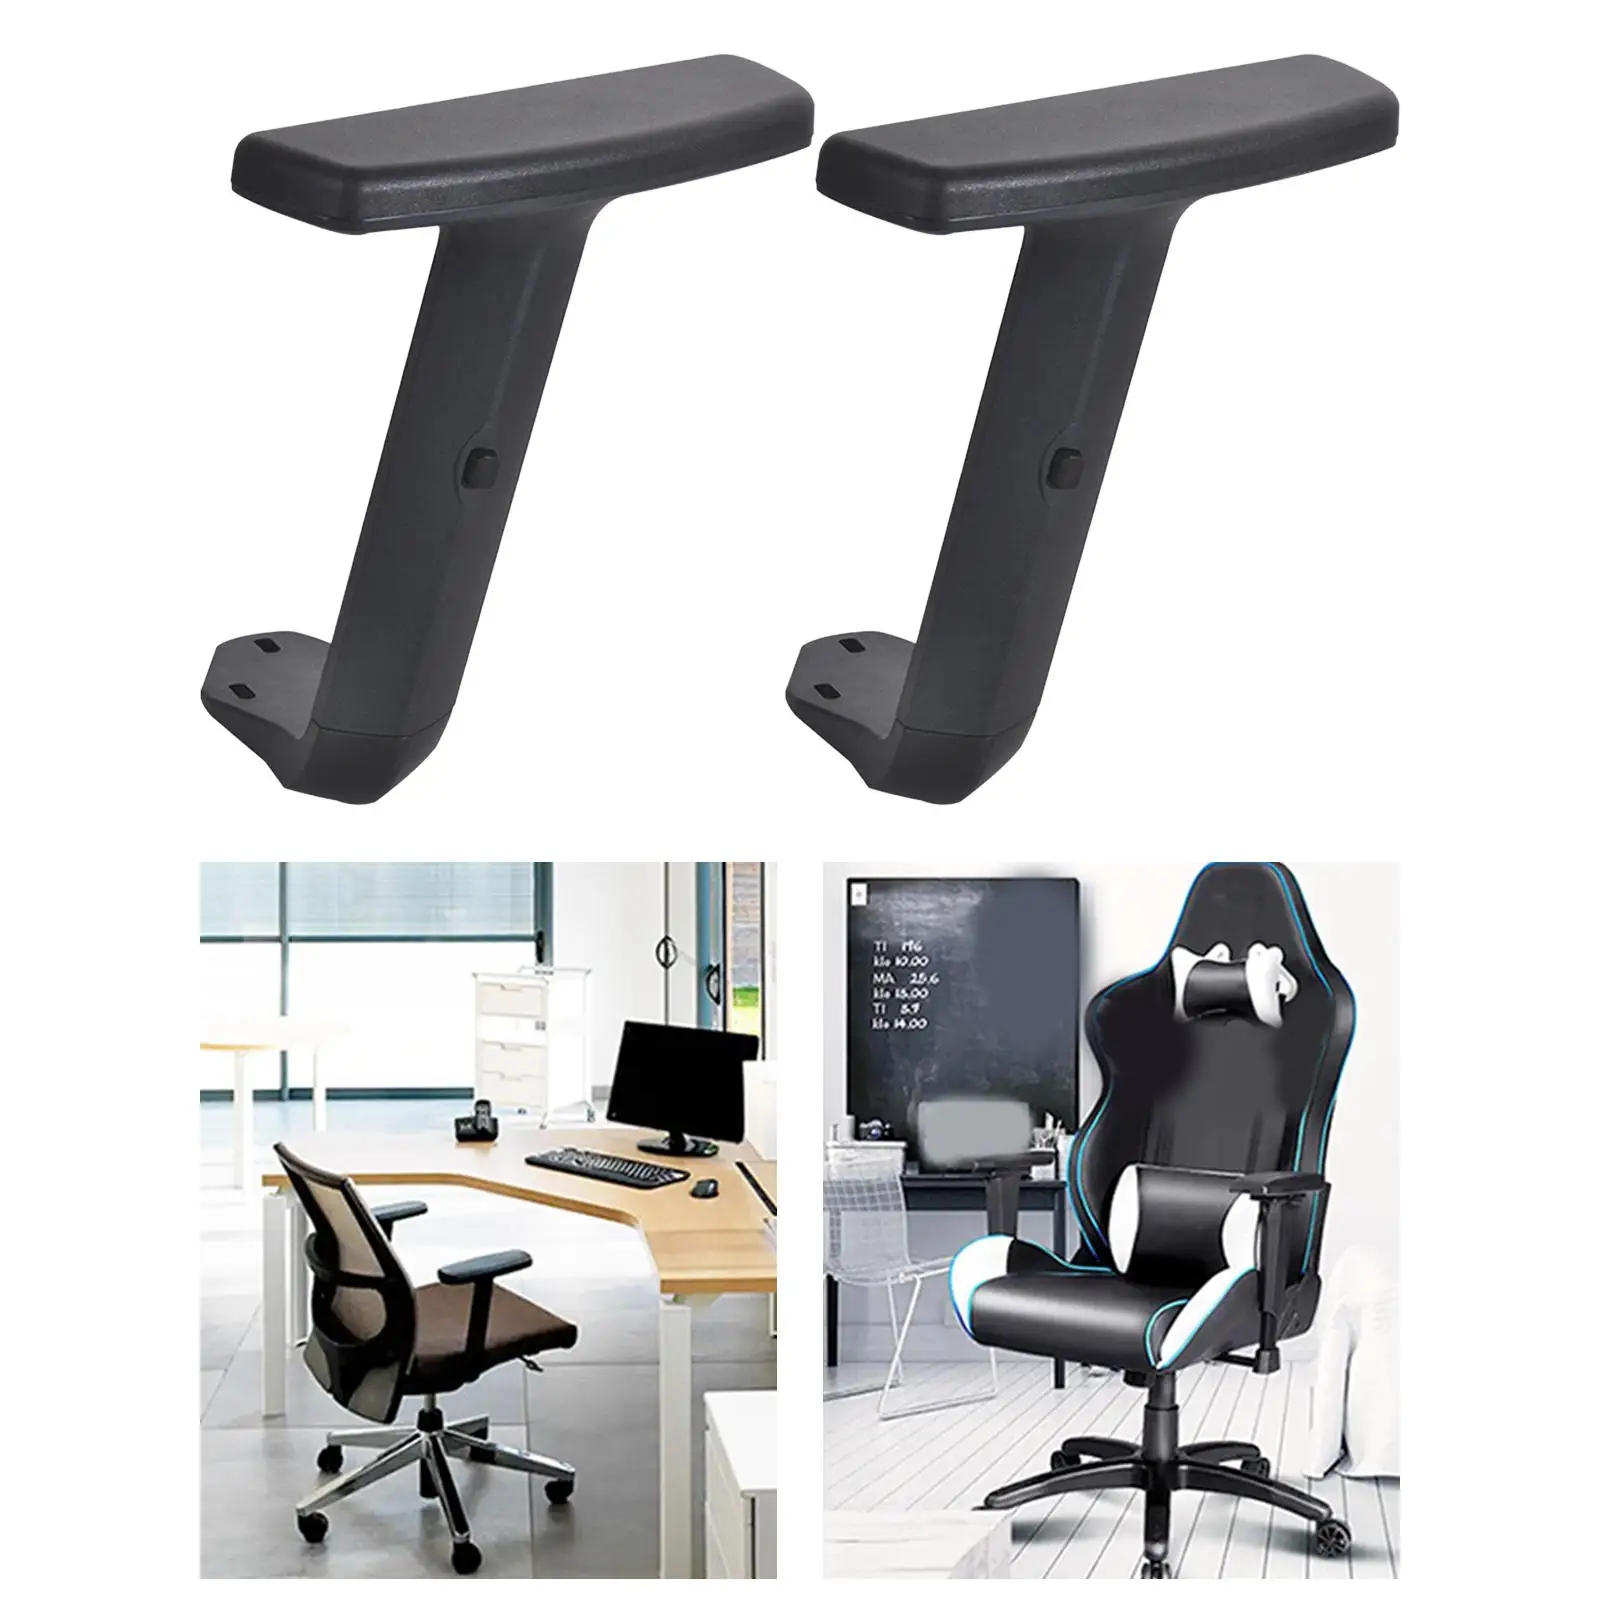 Replacement Armrest Chair Armrest Upright Bracket Office Chair Armrest Pair Chairs Parts Bracket Liftable Replacement Armrest